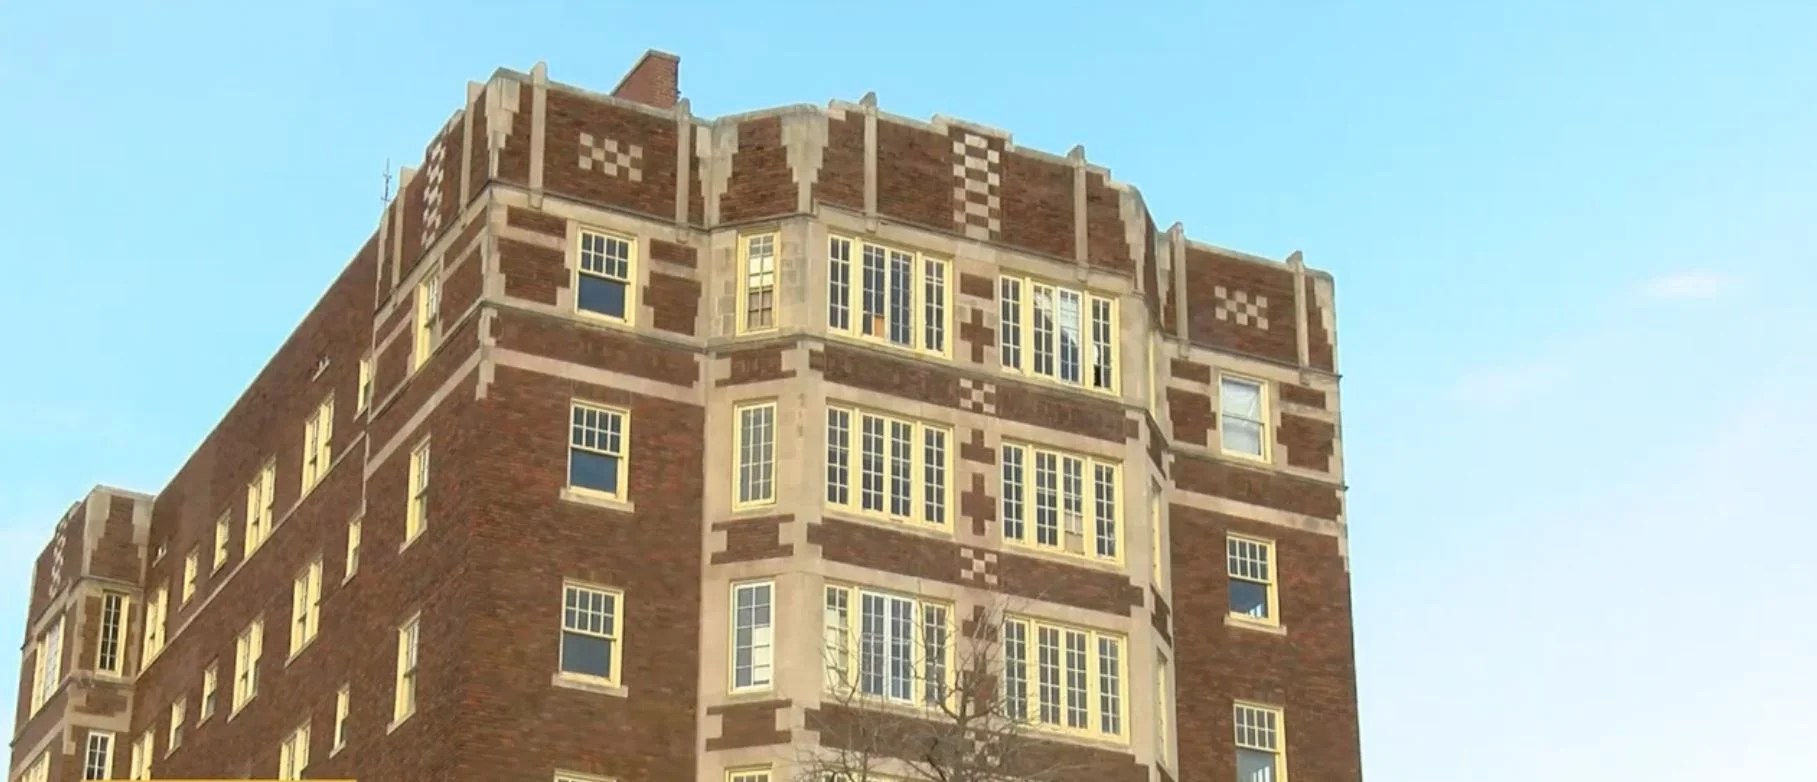 ‘UnPHILtered’: Discussing the historic Drake building